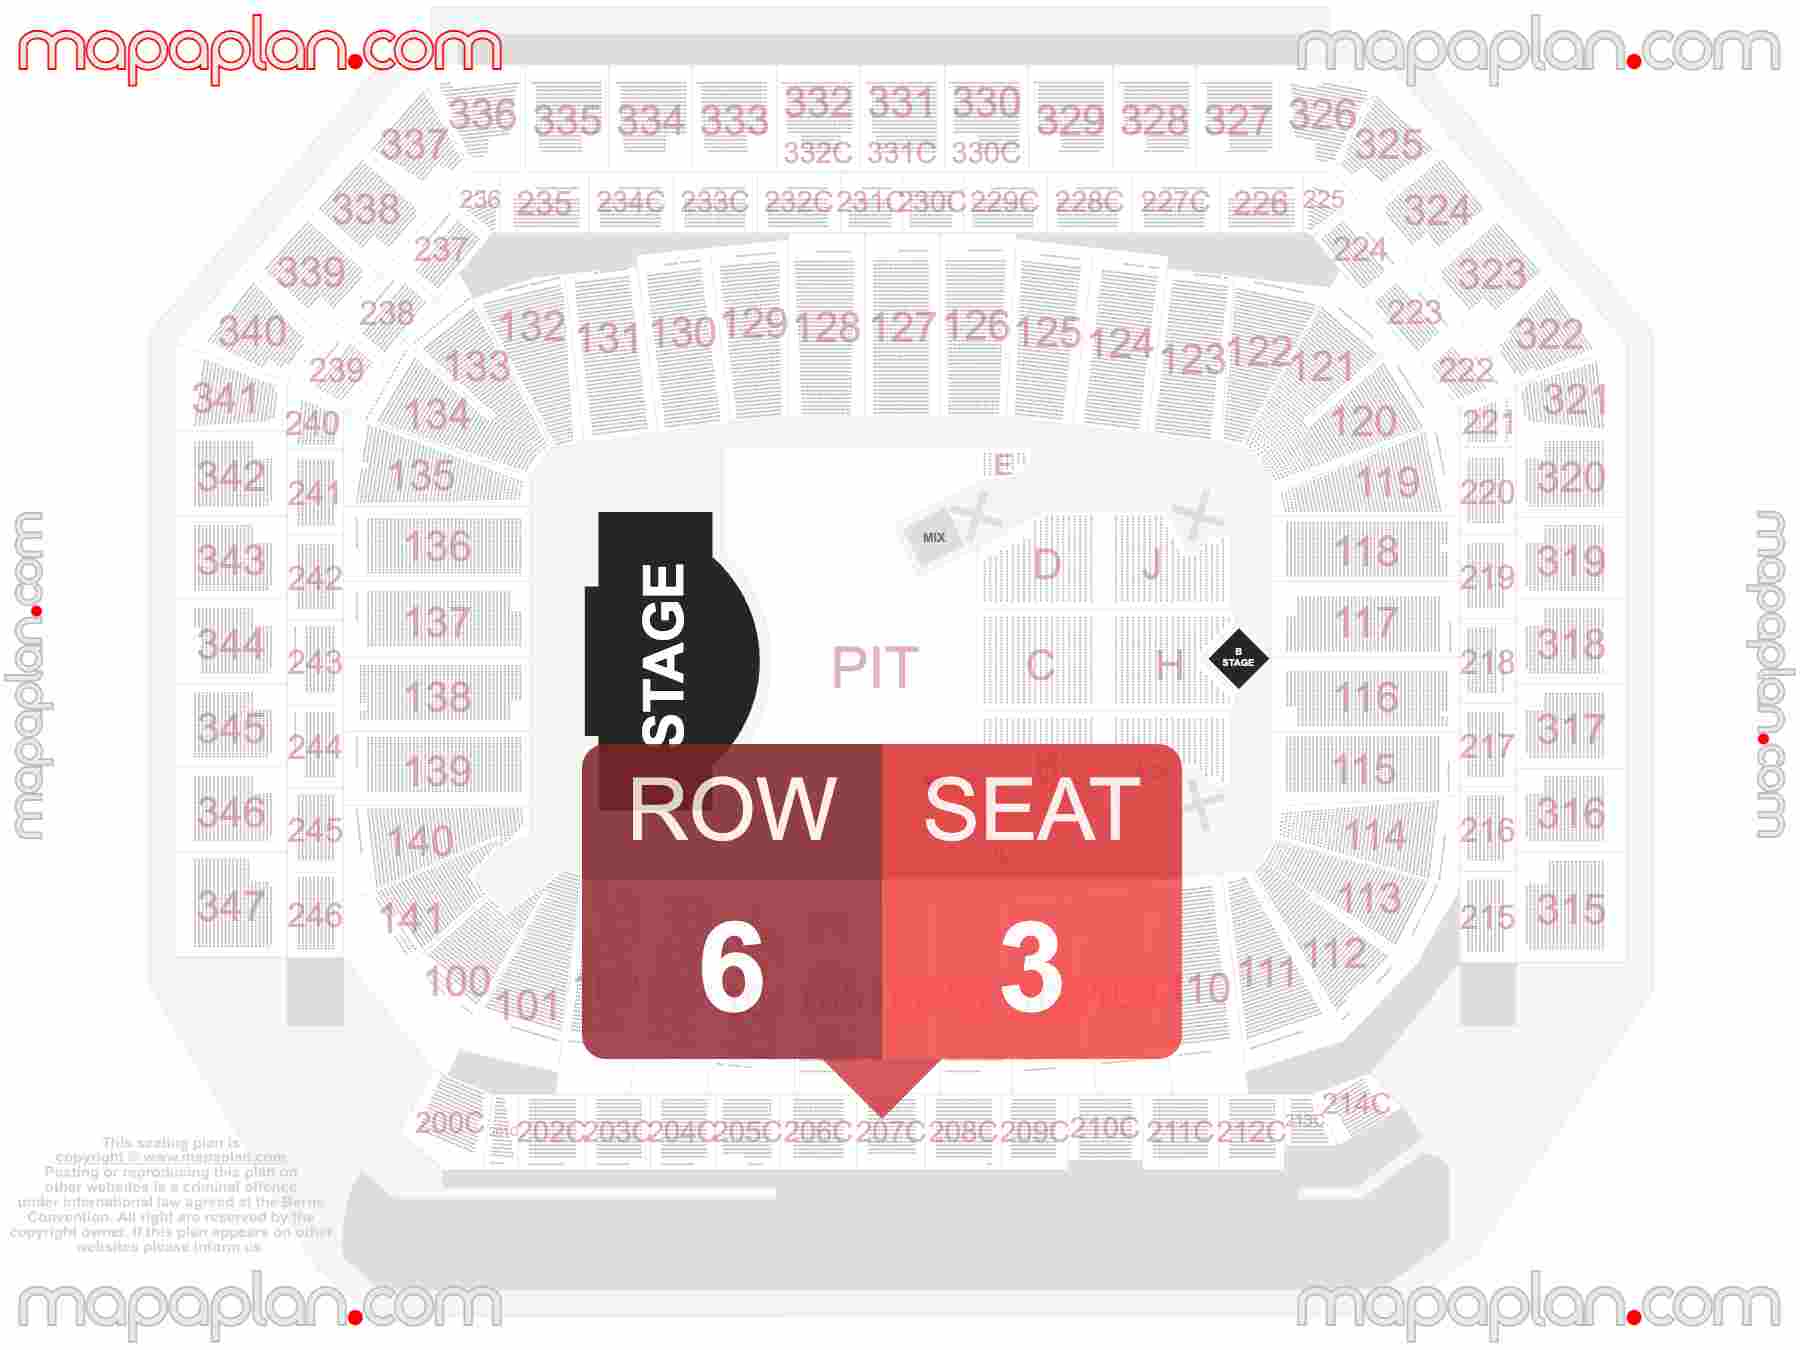 Detroit Ford Field seating chart Concert with floor PIT general admission standing find best seats row numbering system plan showing how many seats per row - Individual 'find my seat' virtual locator